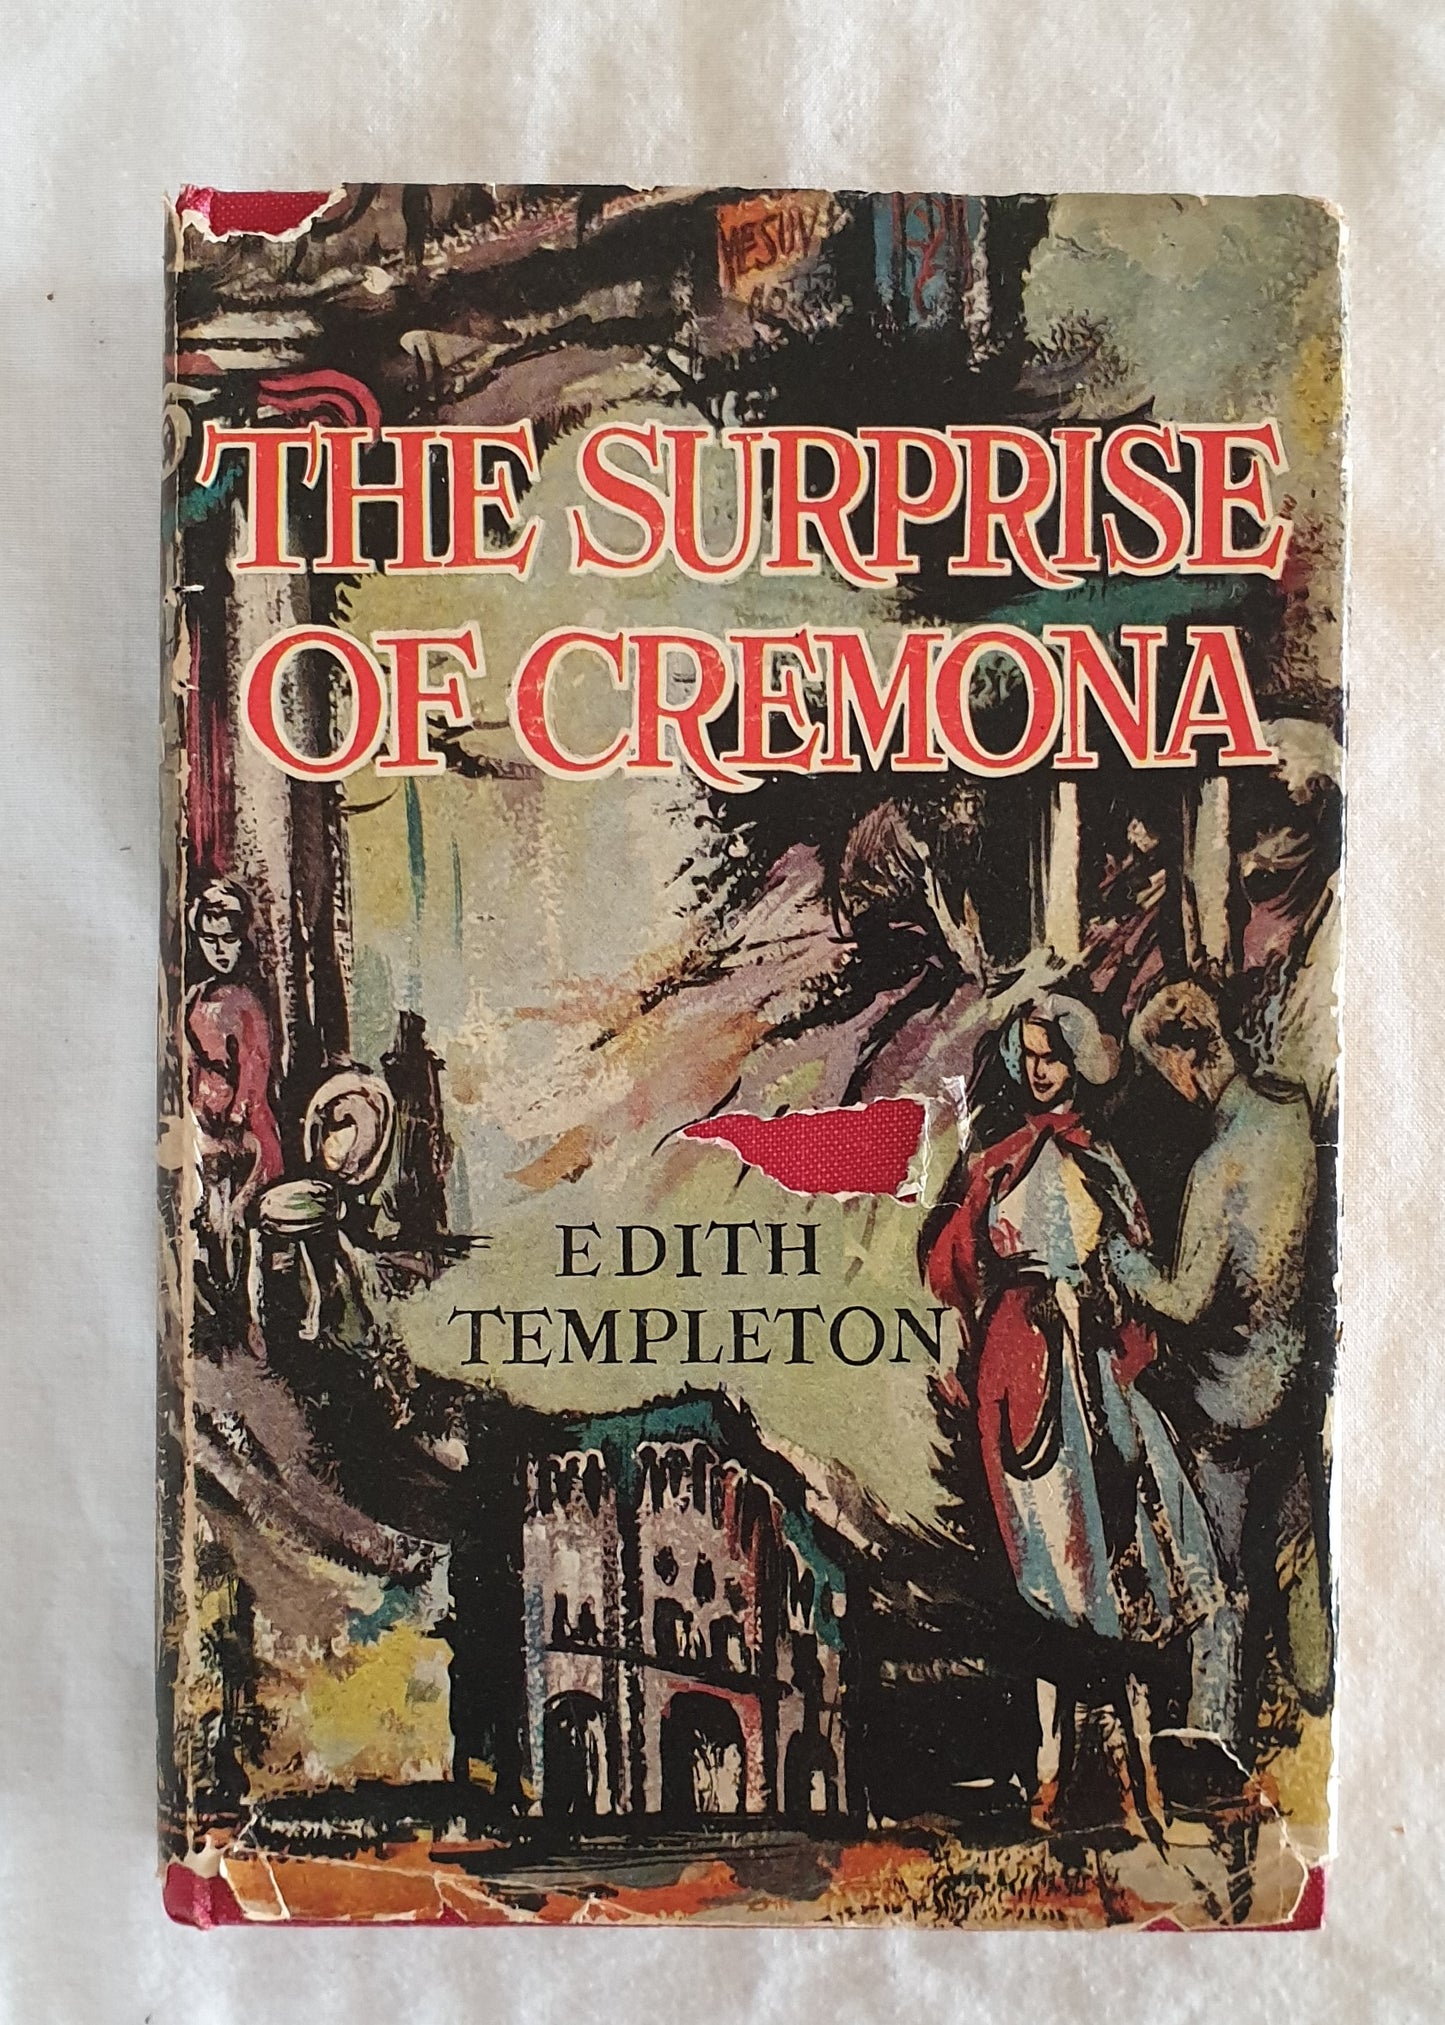 The Surprise of Cremona  by Edith Templeton